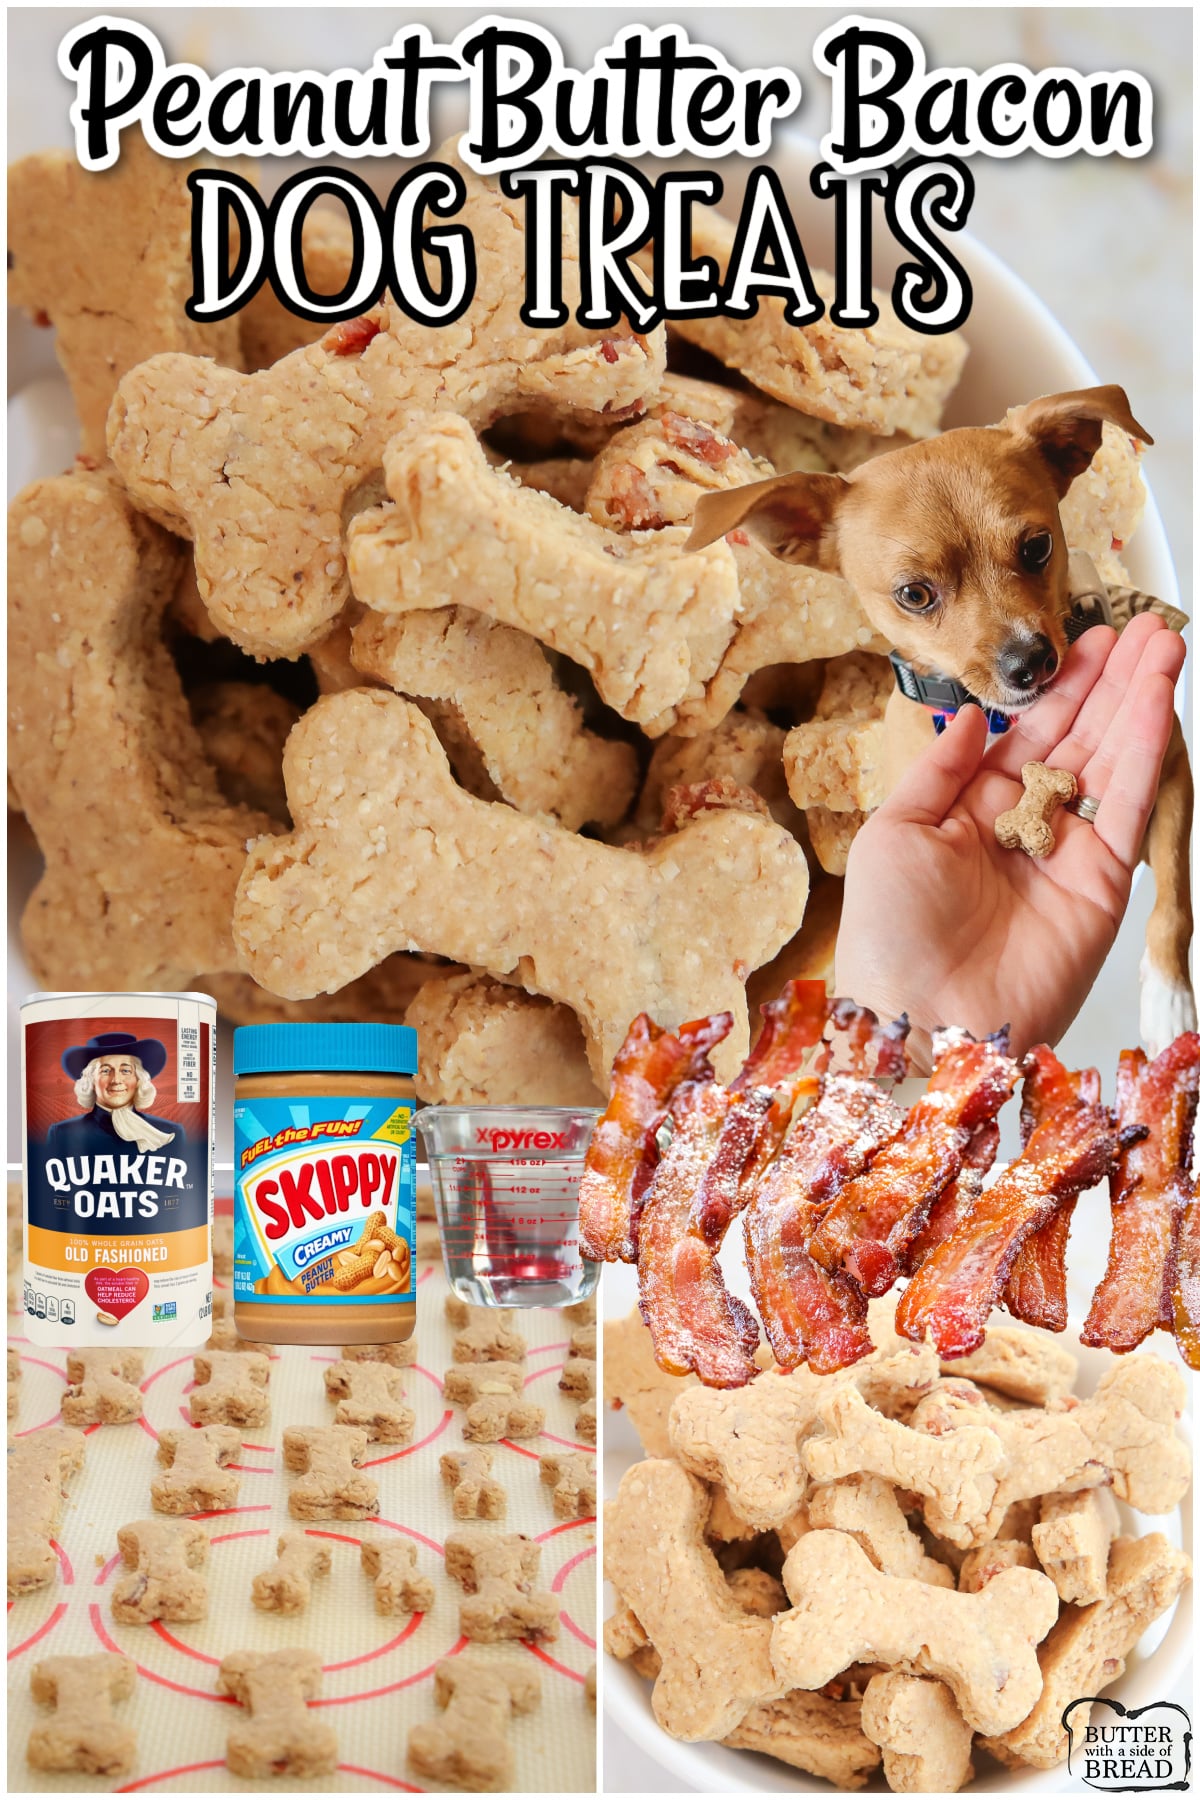 Peanut Butter Bacon Dog Treats are simple, tasty treats your dog will LOVE! Homemade oat flour combined with peanut butter and crumbled bacon for a protein packed dog biscuit that will be devoured! 